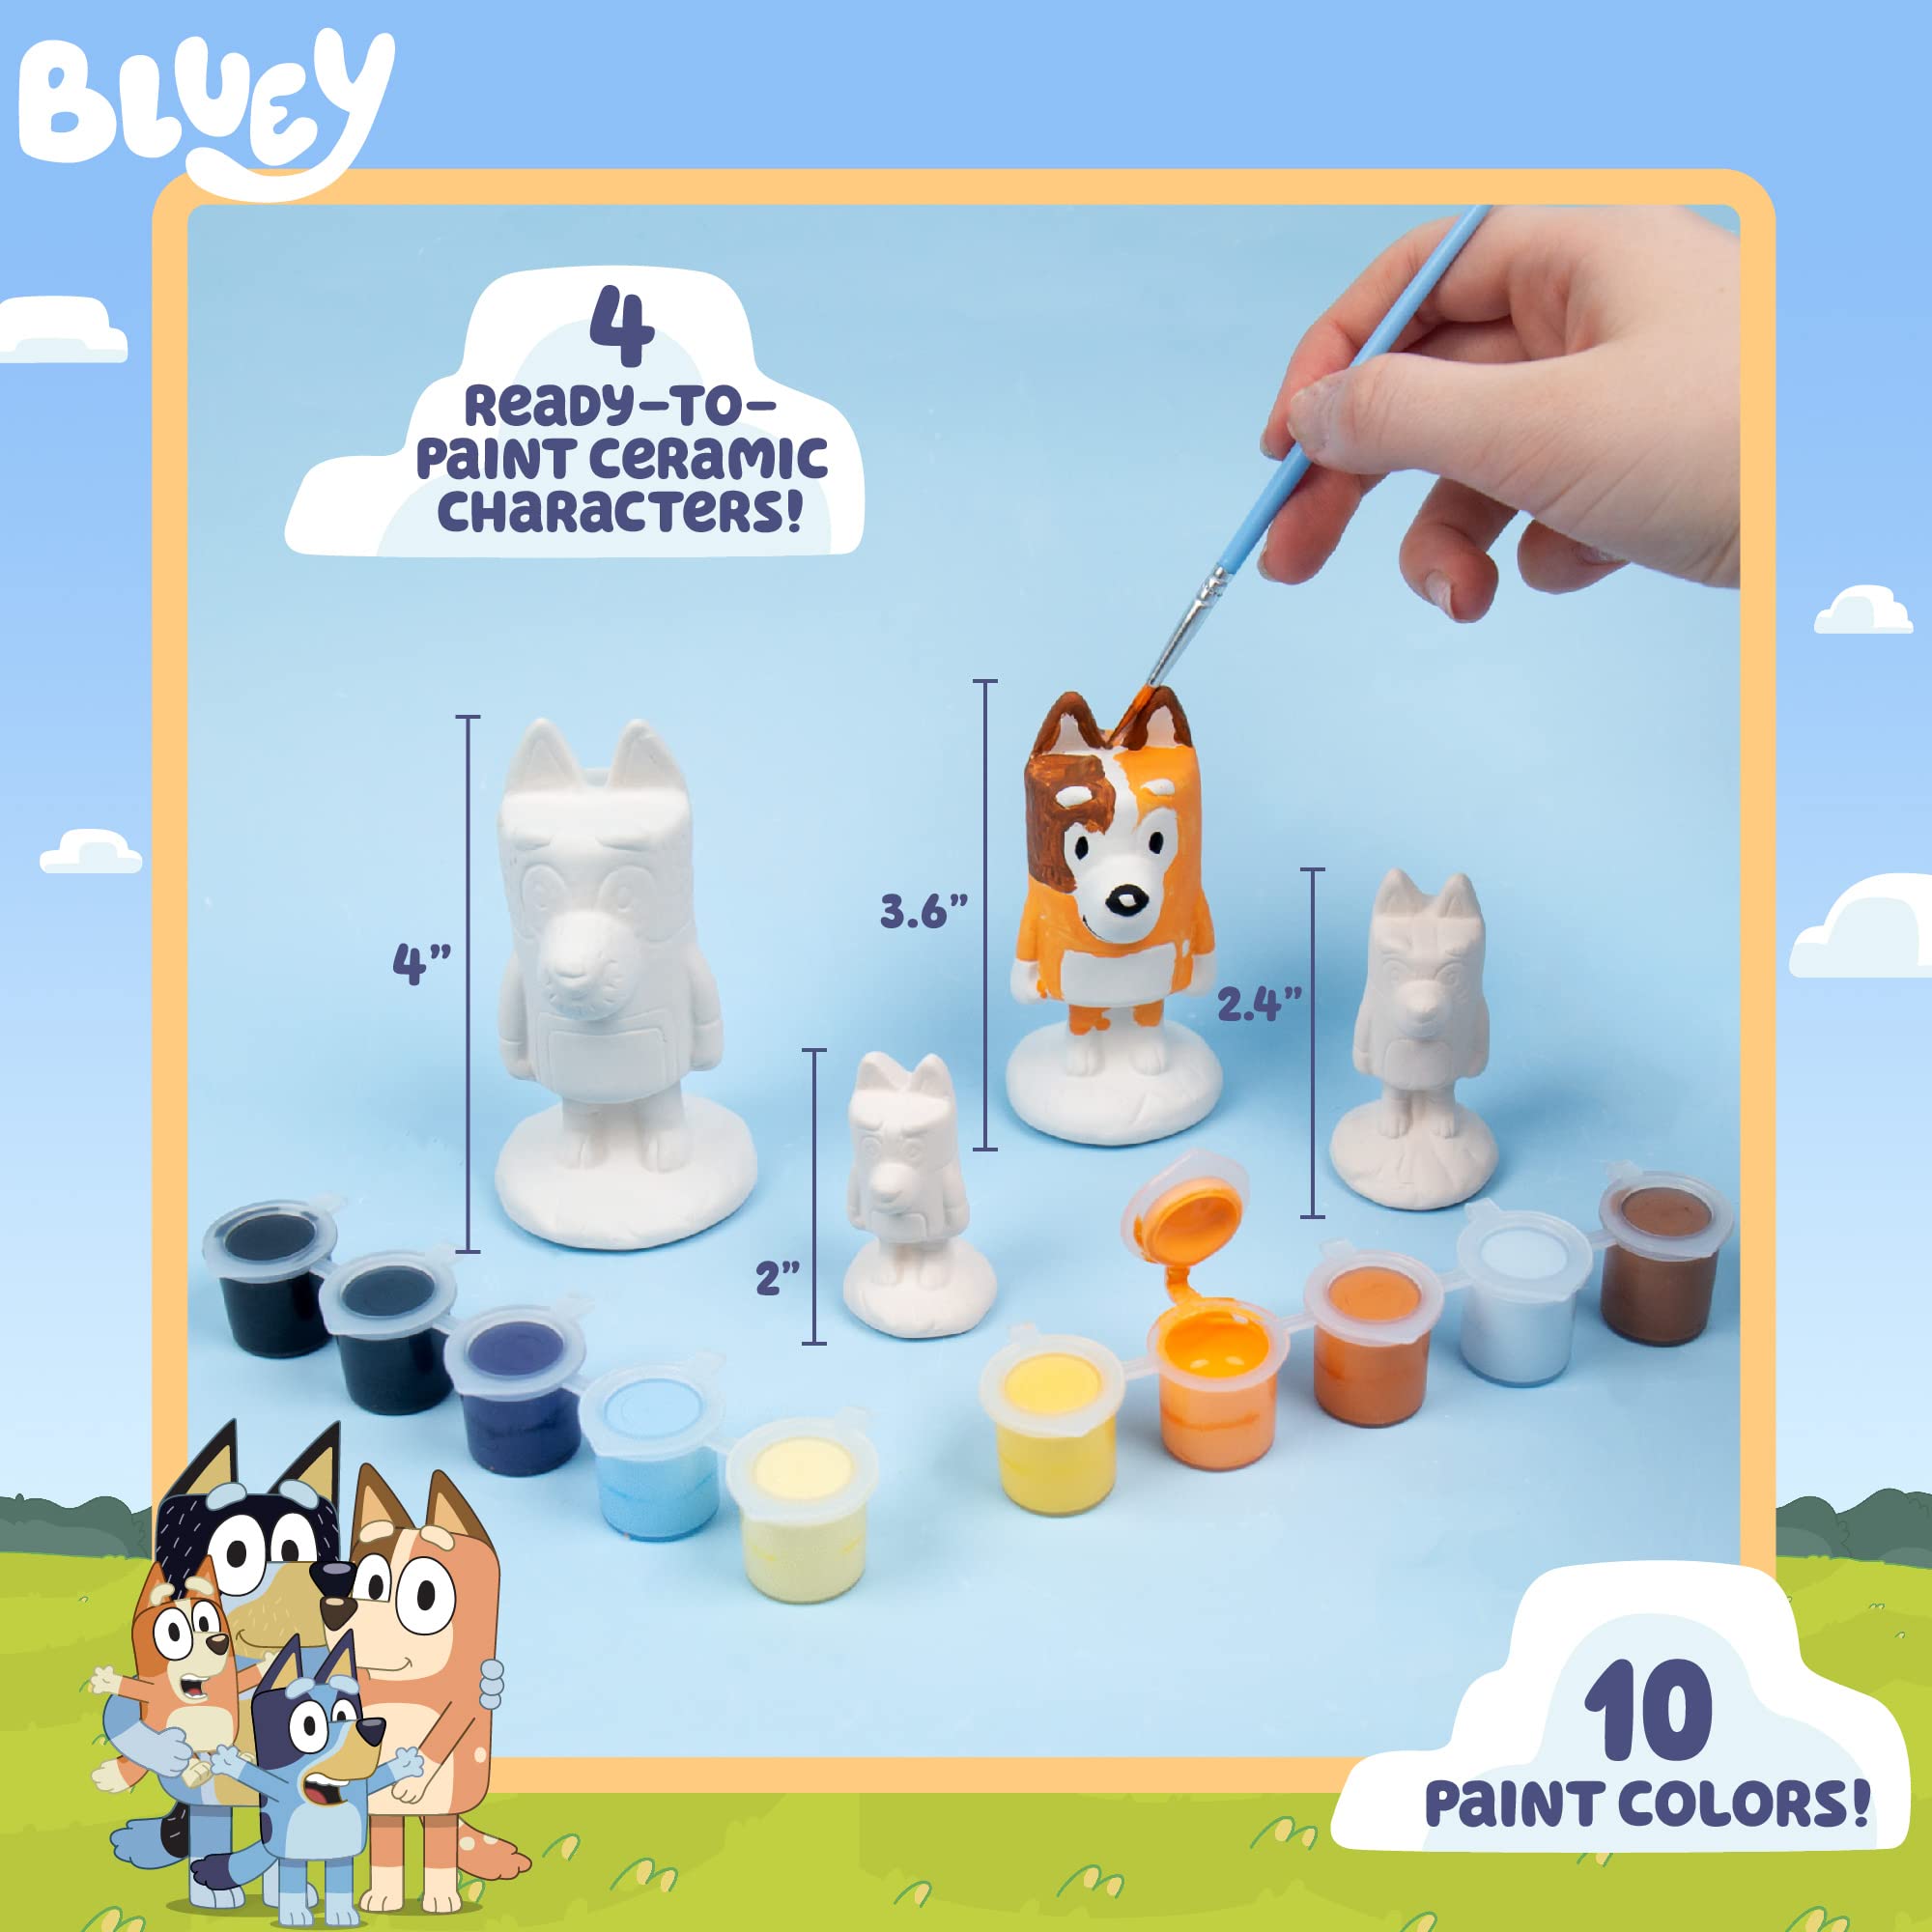 Bluey Paint Your Own Figurines – Ceramic and Bingo Figurines for Kids to Paint – Fun Painting Kit – Creative Toys for Kids, Great for Birthday Parties & Sleepovers,Multi